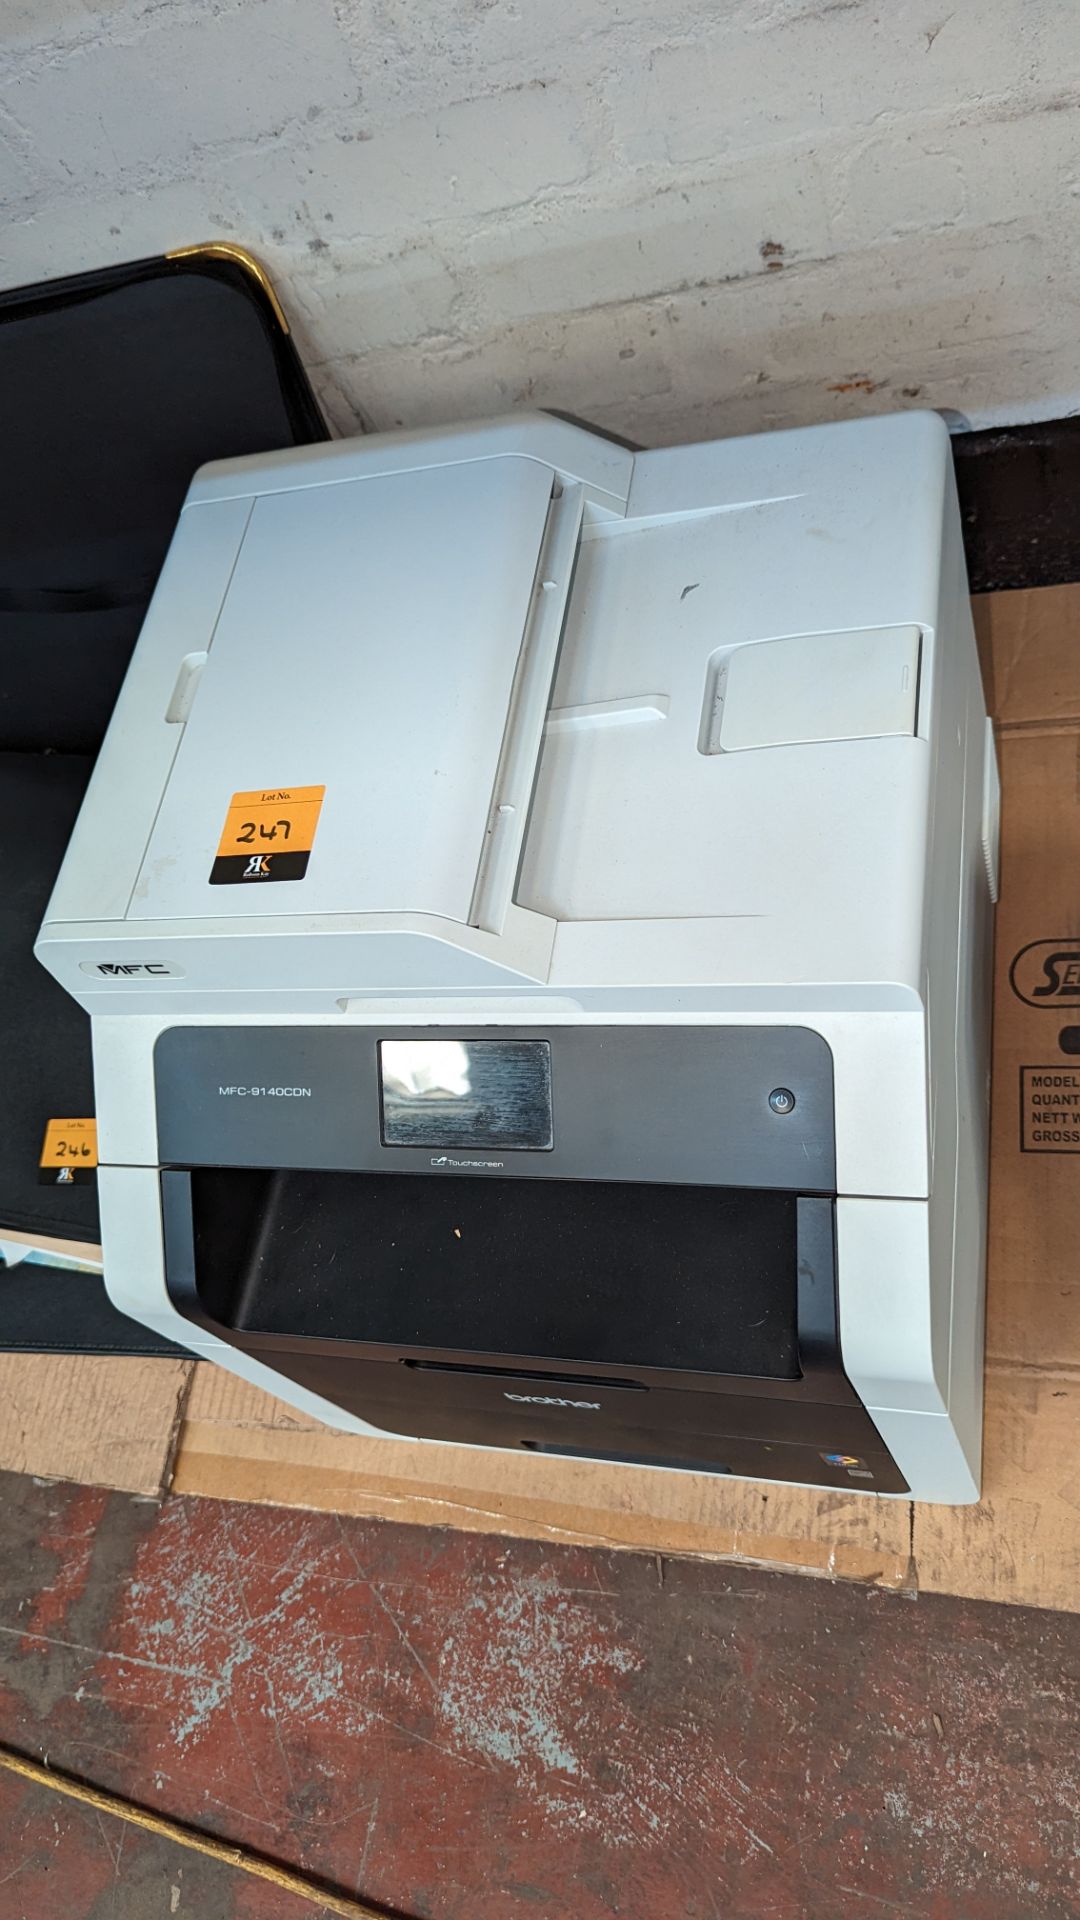 Brother MFC-9140CDN multifunction colour printer - Image 5 of 5